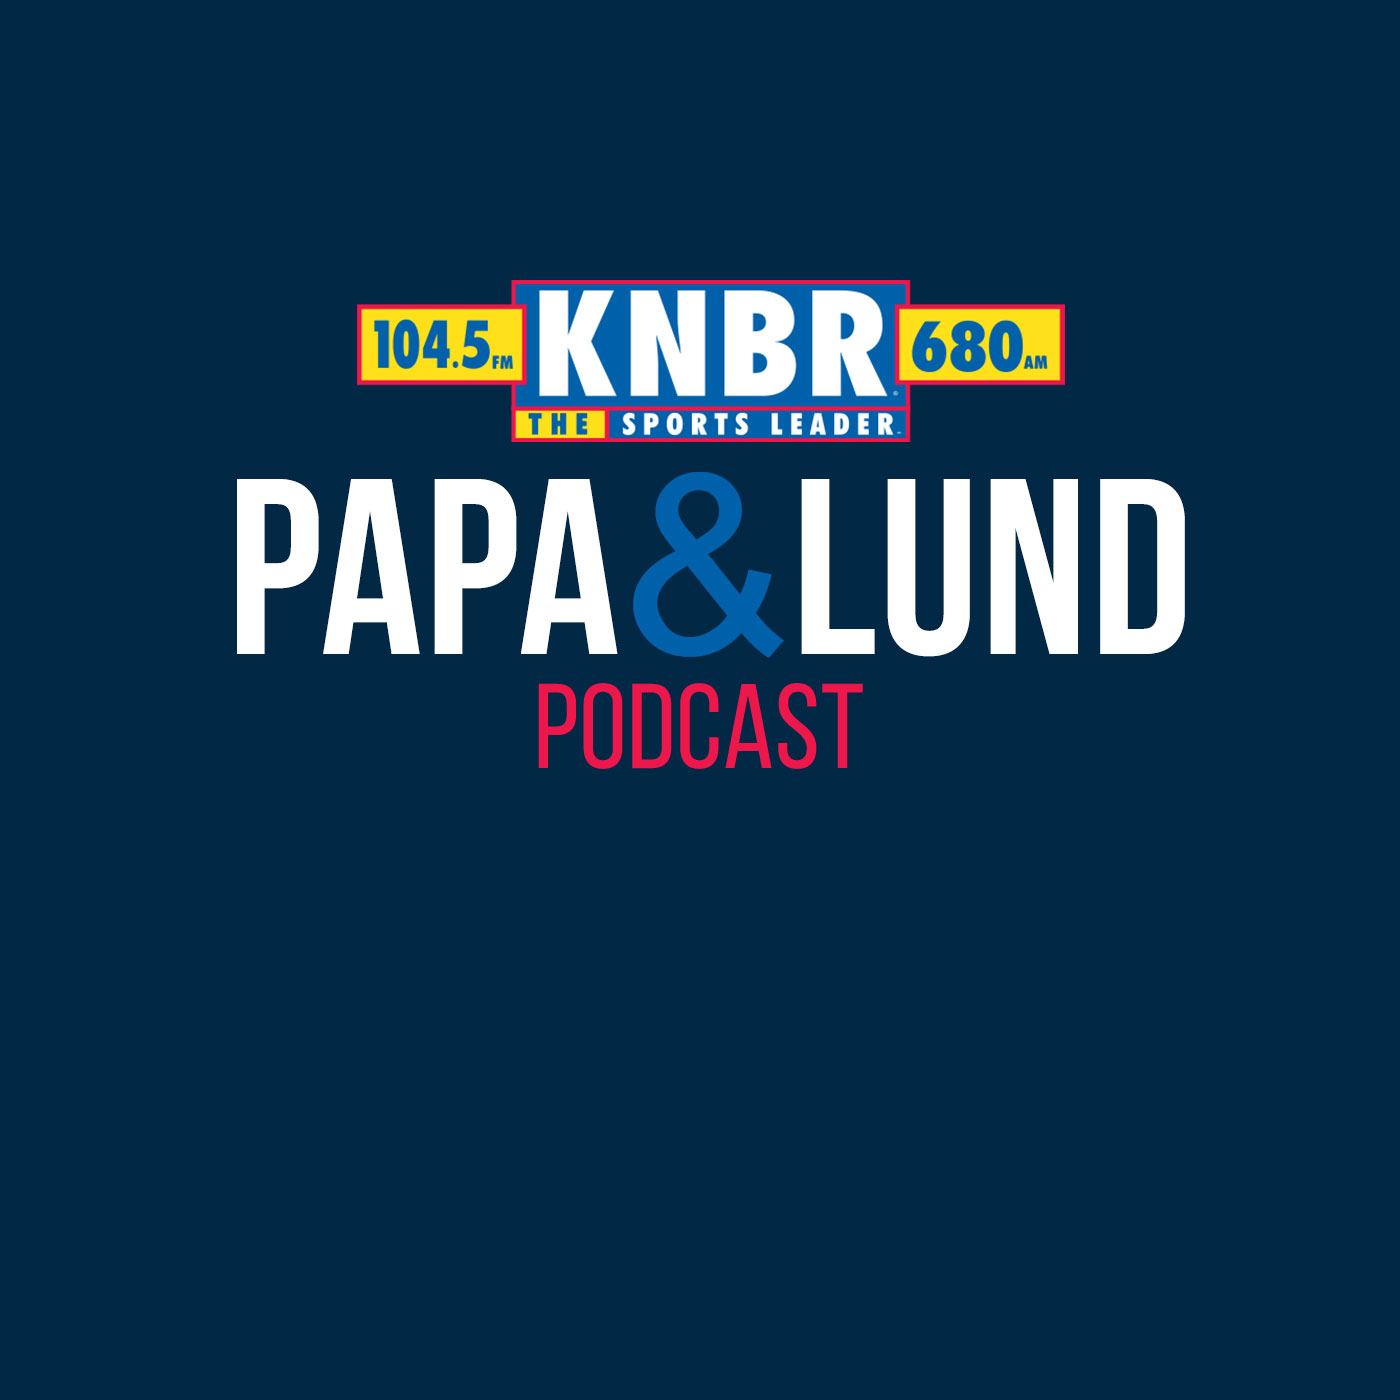 7-17 Ron Kroichick joins John Lund to discuss the greatness of Steph Curry as he won the golf tournament at Edgewood